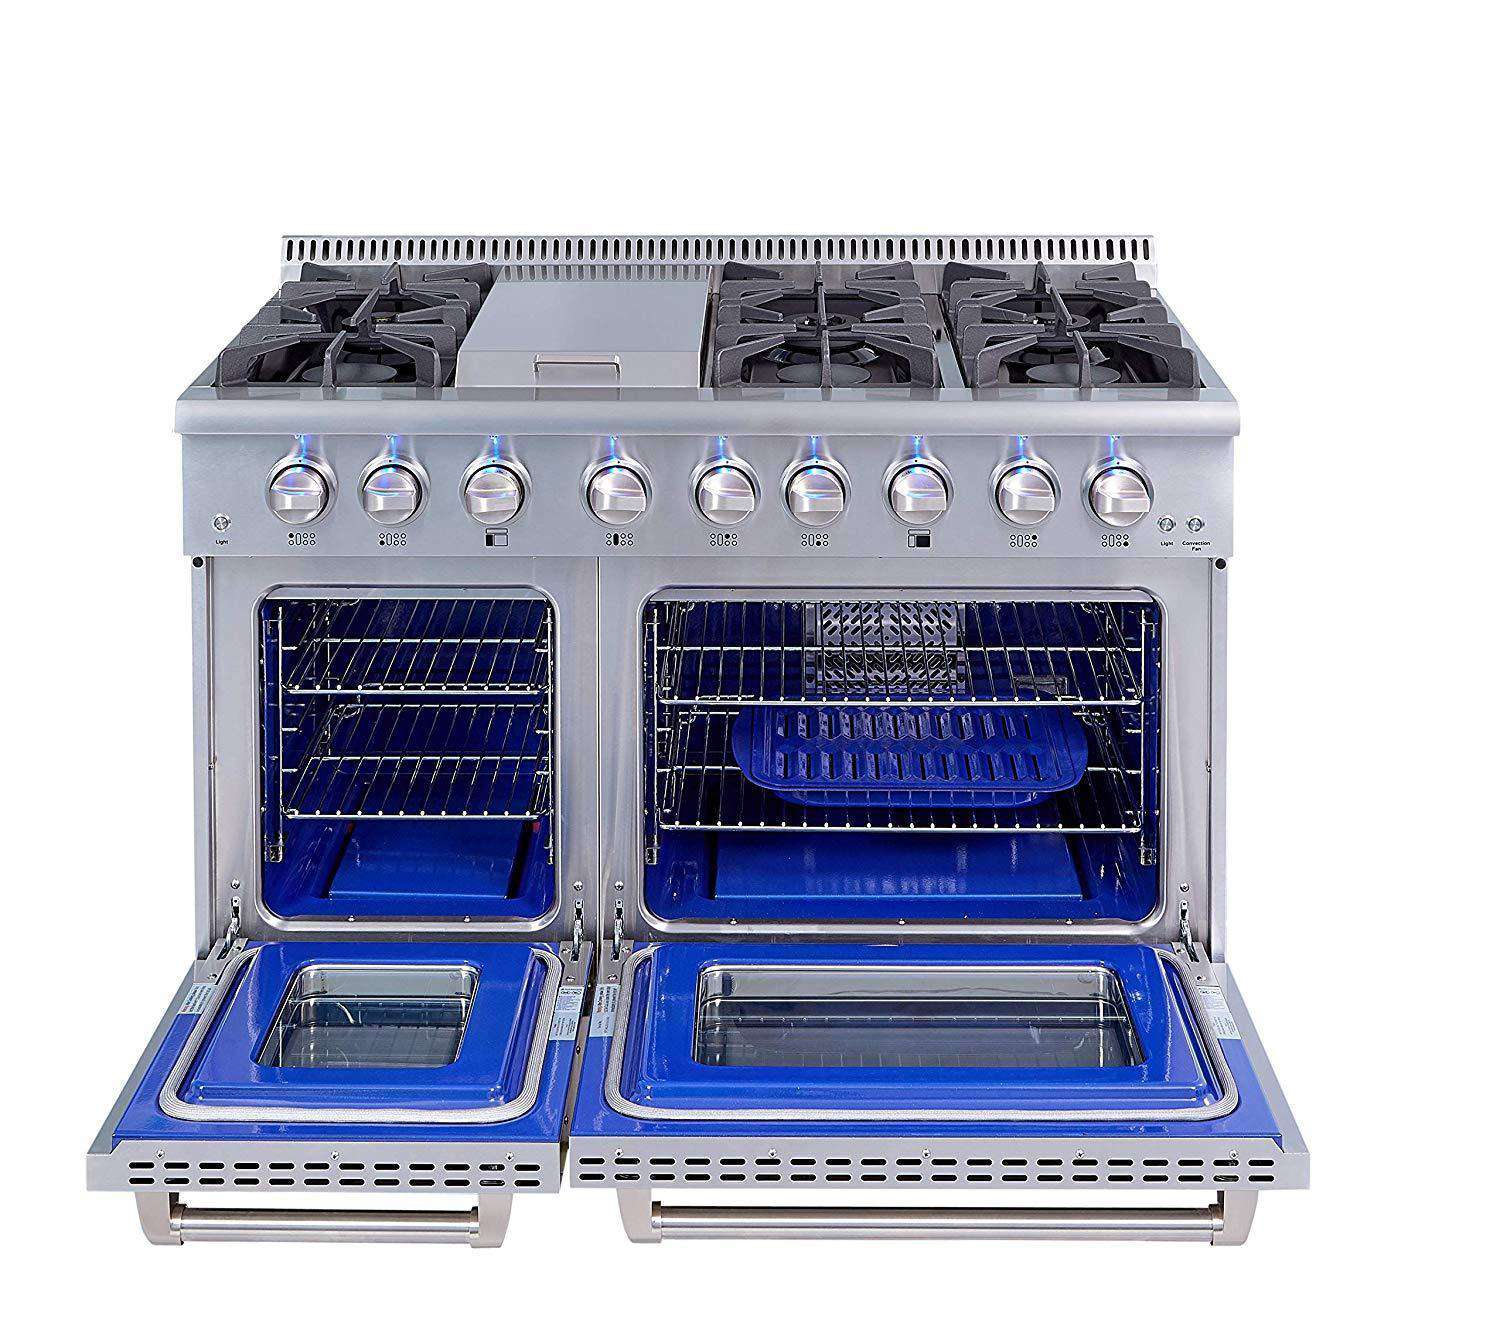 Thor Kitchen, Thor Kitchen HRG4808U 48 in. Professional Gas Range with Double Oven 6 Burners Blue Porcelain Interior Stainless Steel New